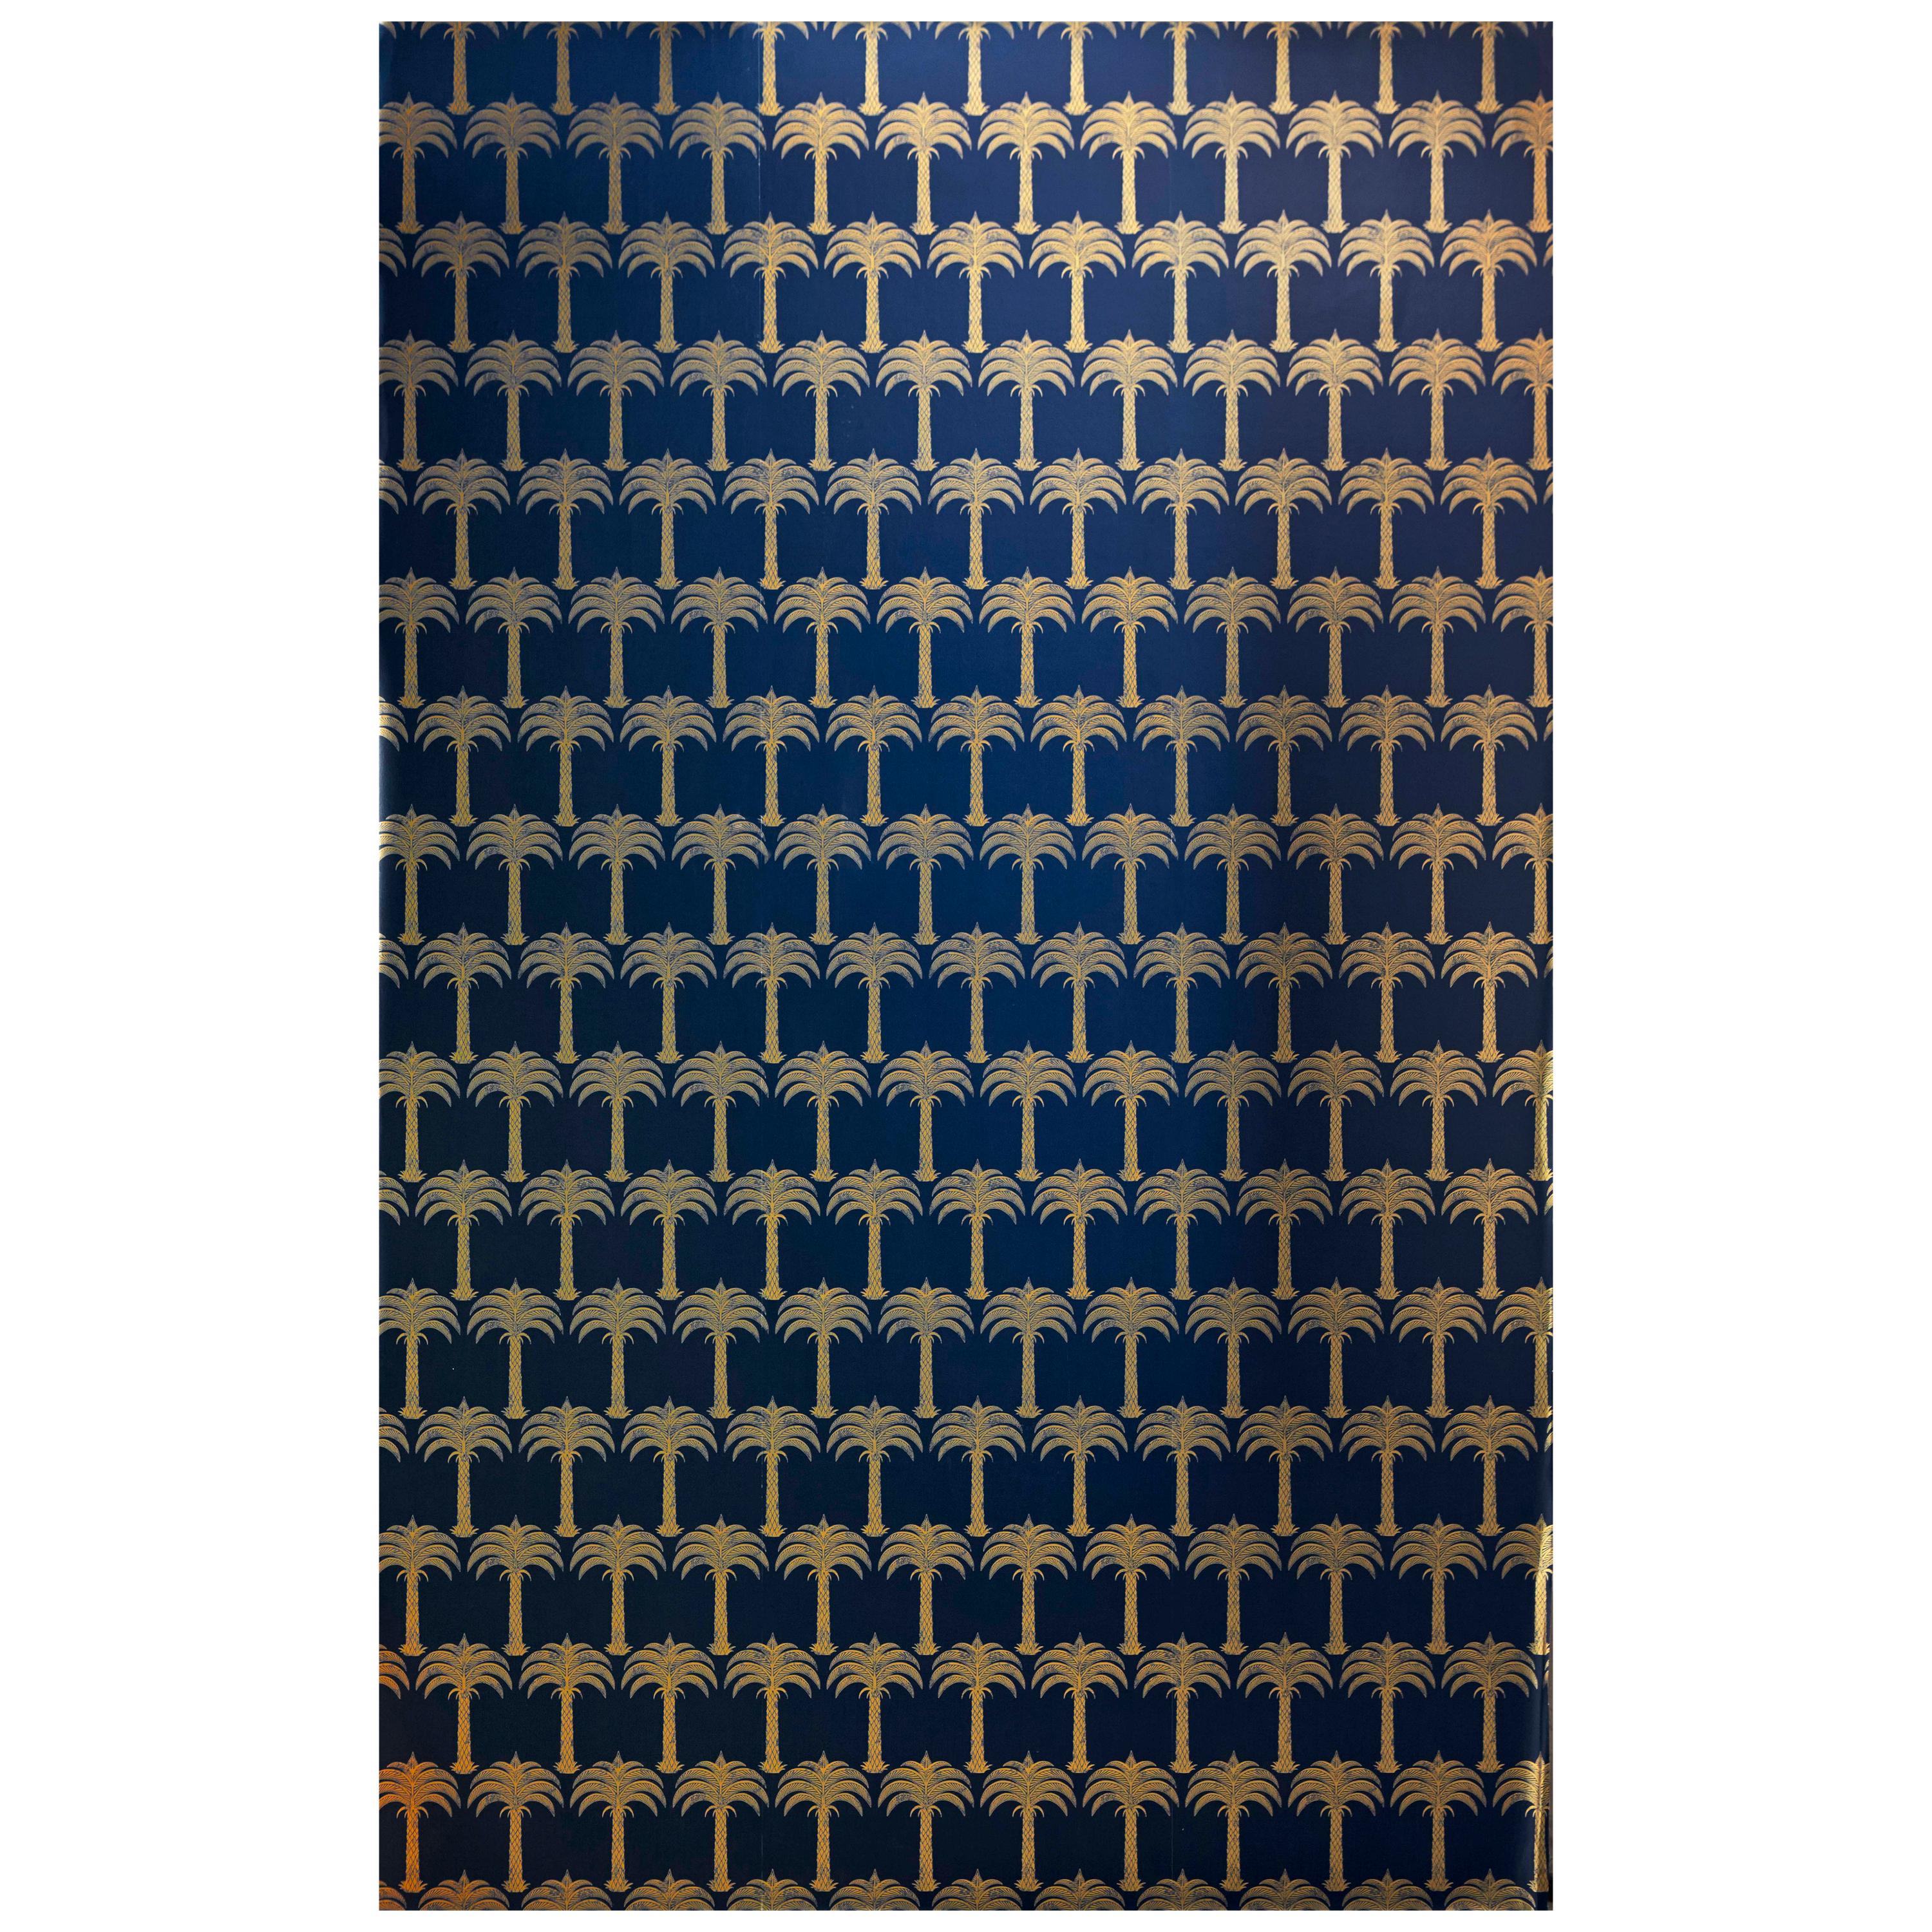 'Marrakech Palm' Contemporary, Traditional Wallpaper in Midnight Blue For Sale